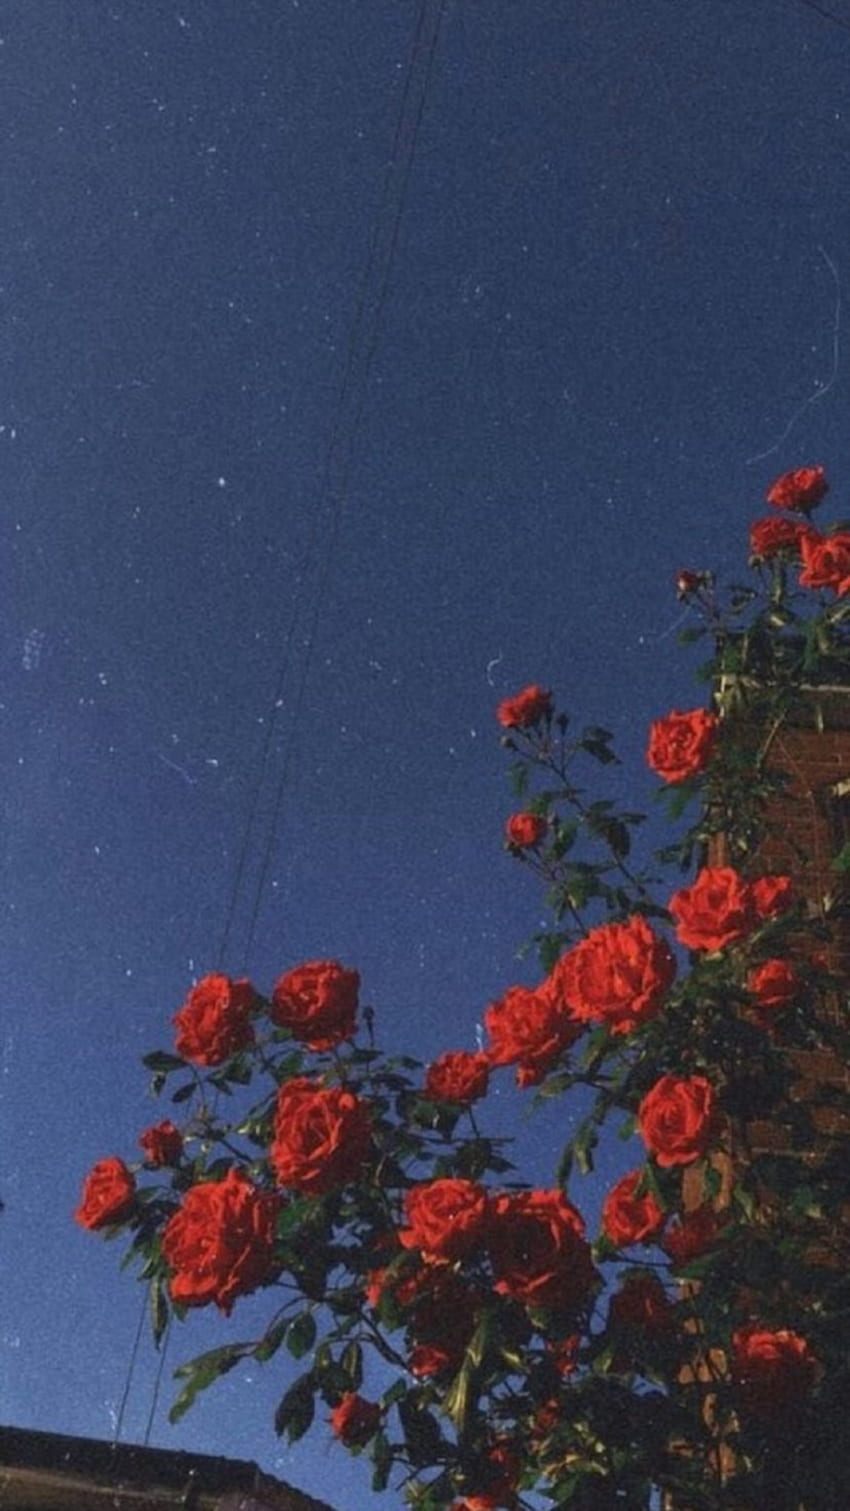 Red roses against a blue sky - Retro, vintage, photography